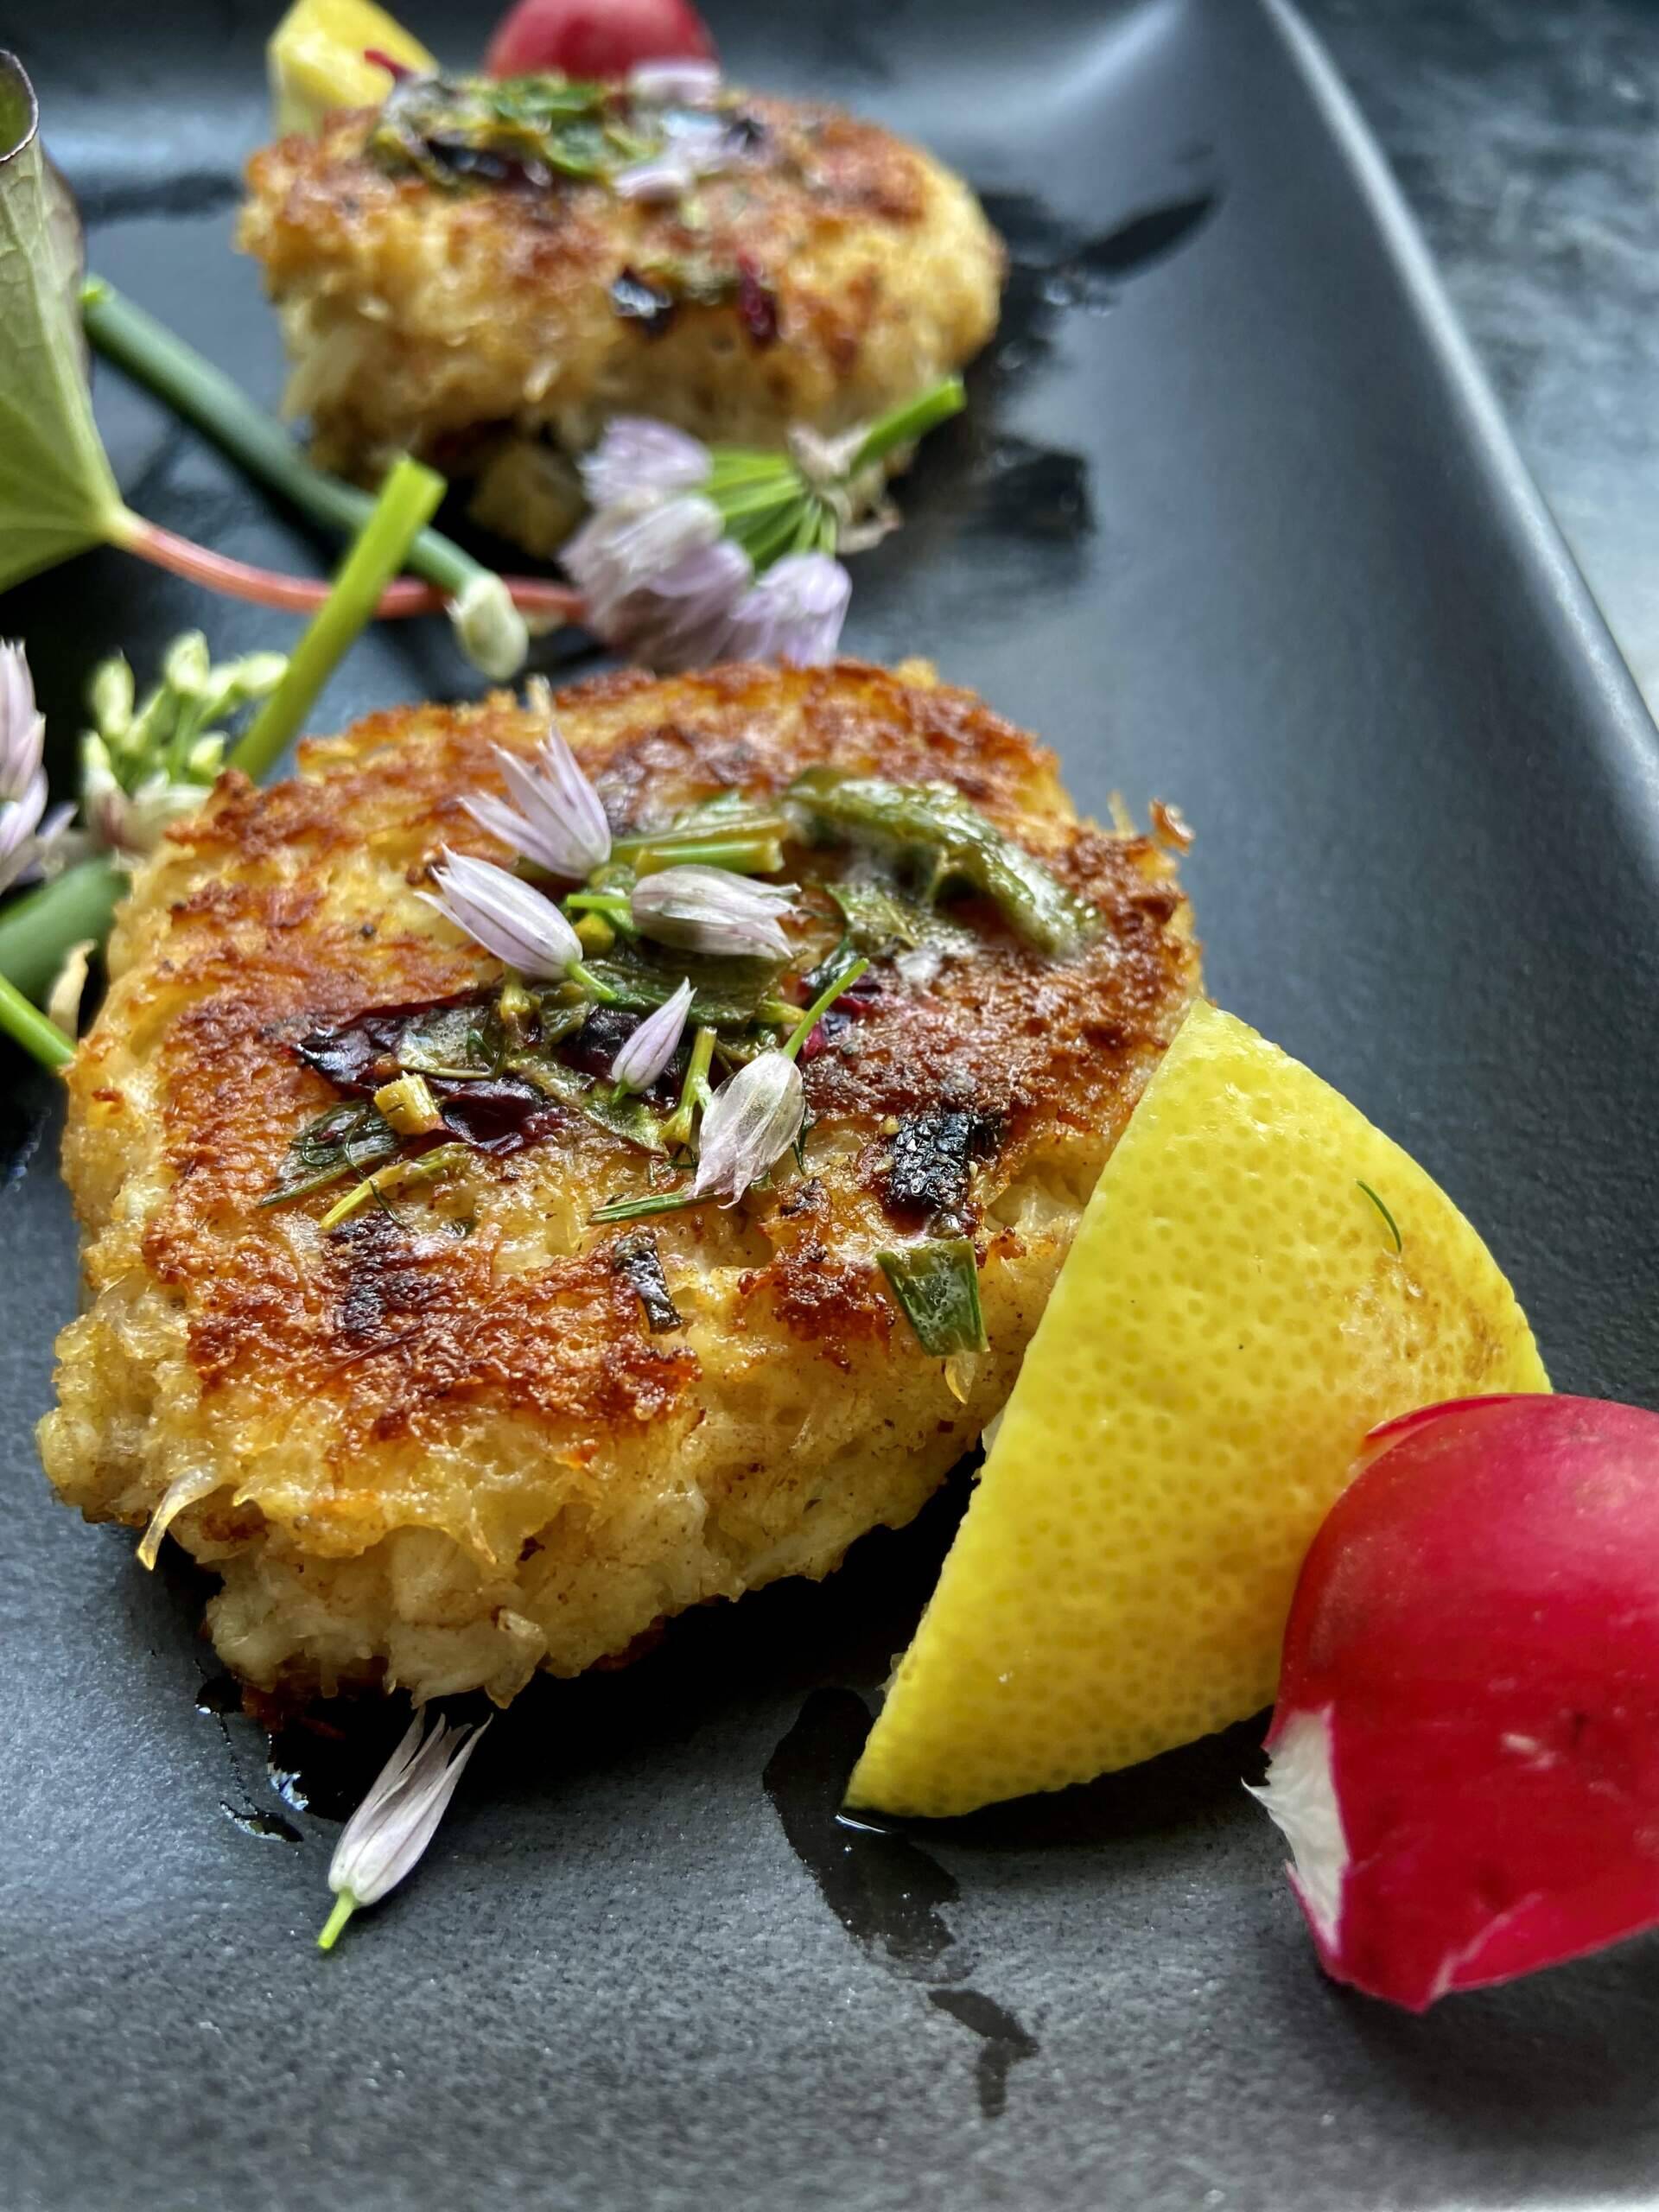 Best Crab Cakes in Boston, MA - Order Crab Cakes | Toast